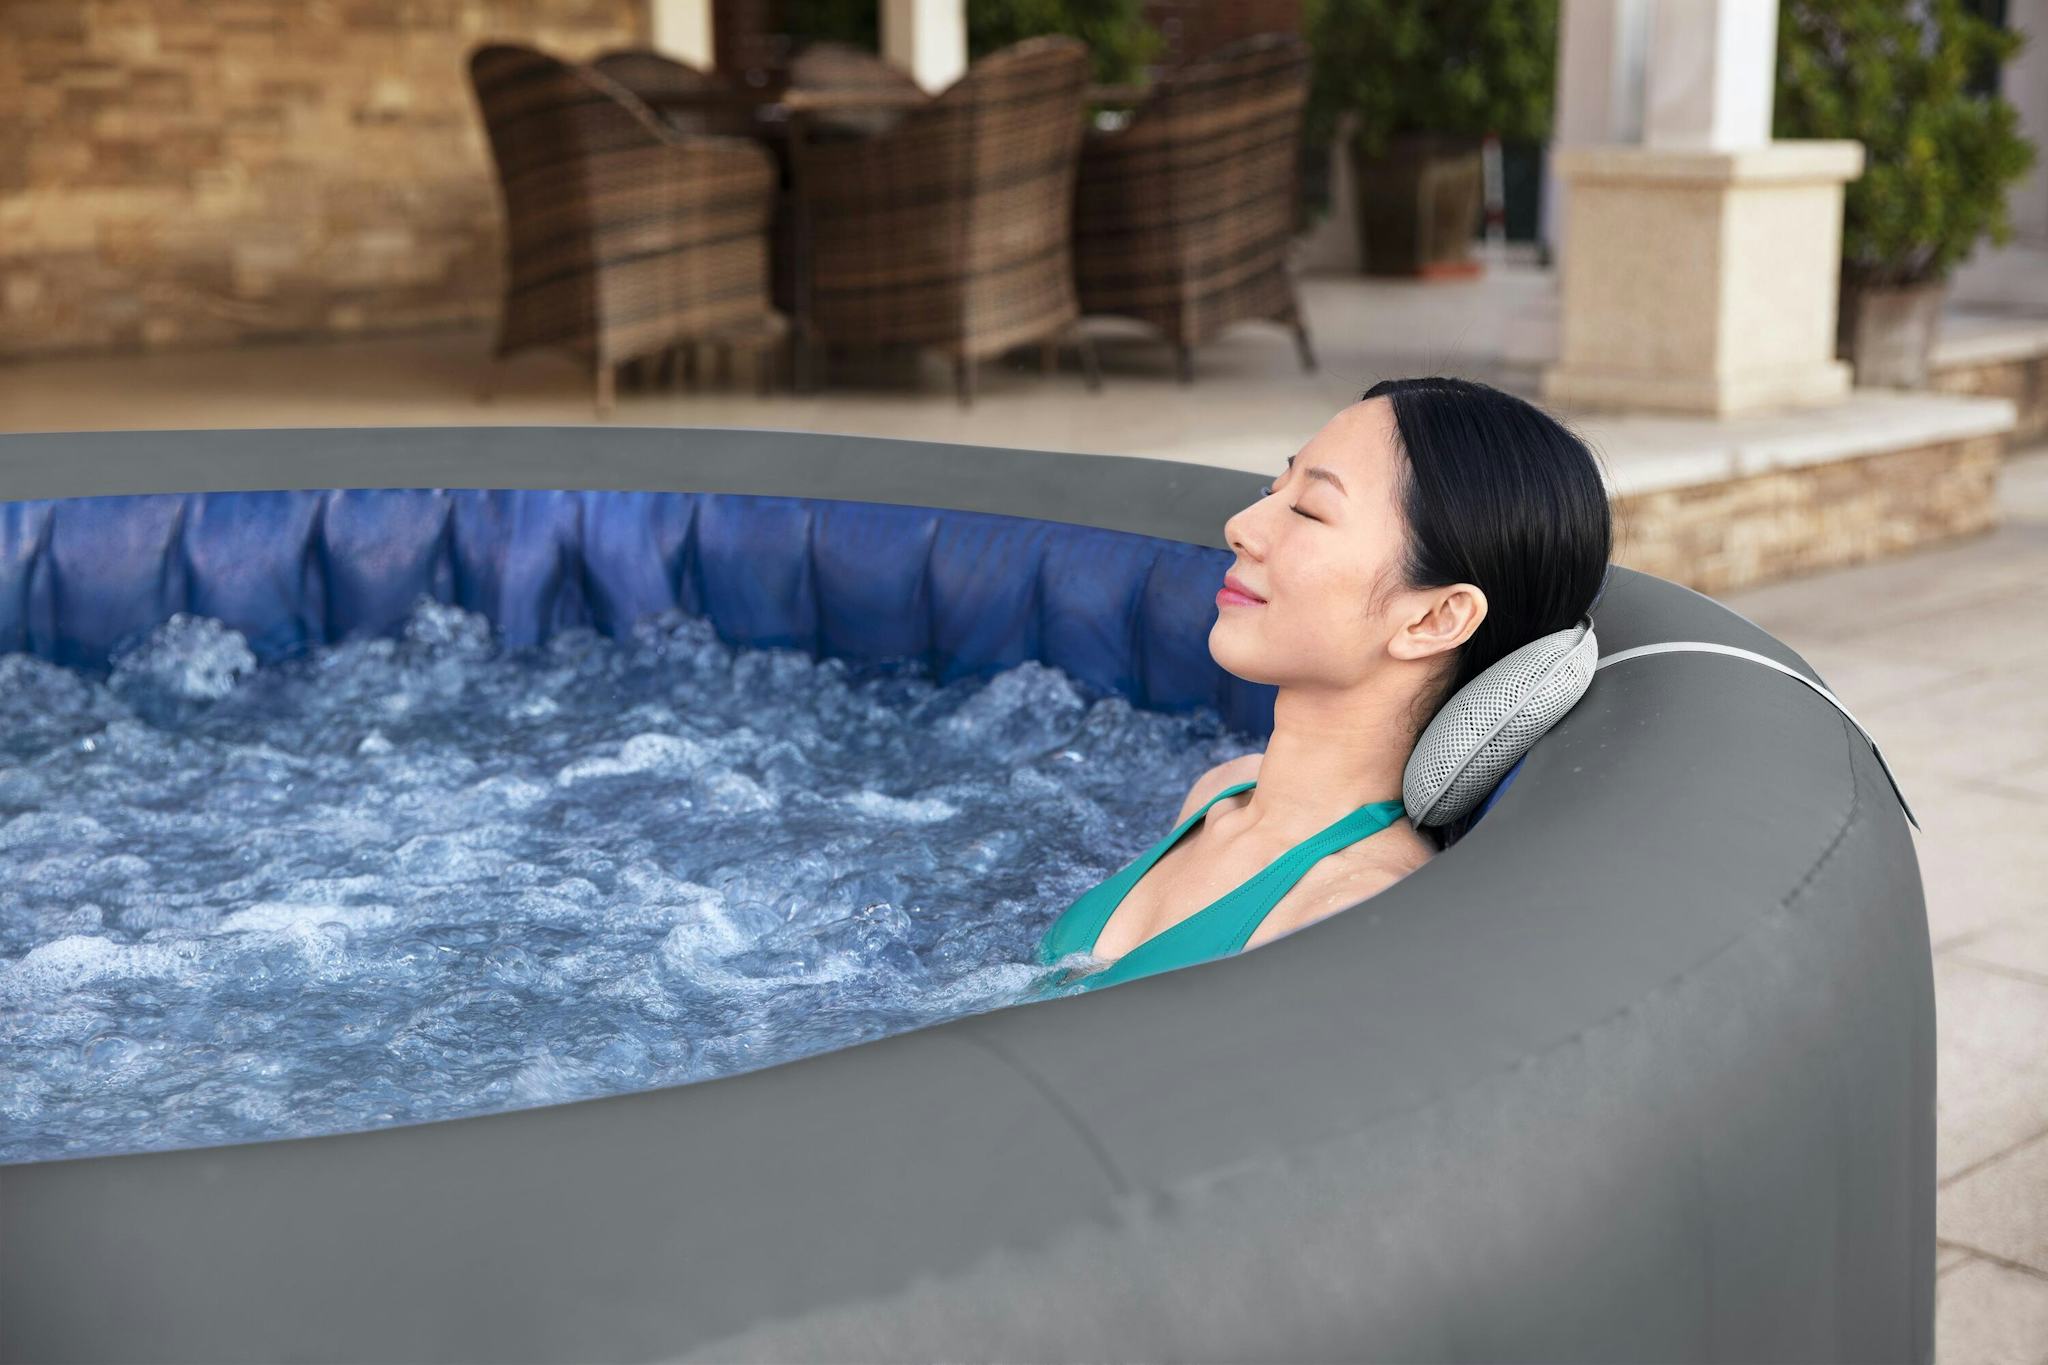 Spas Gonflables Spa gonflable rond Lay-Z-Spa Santorini Hydrojet pro™ 5 - 7 personnes Wifi Bestway 11